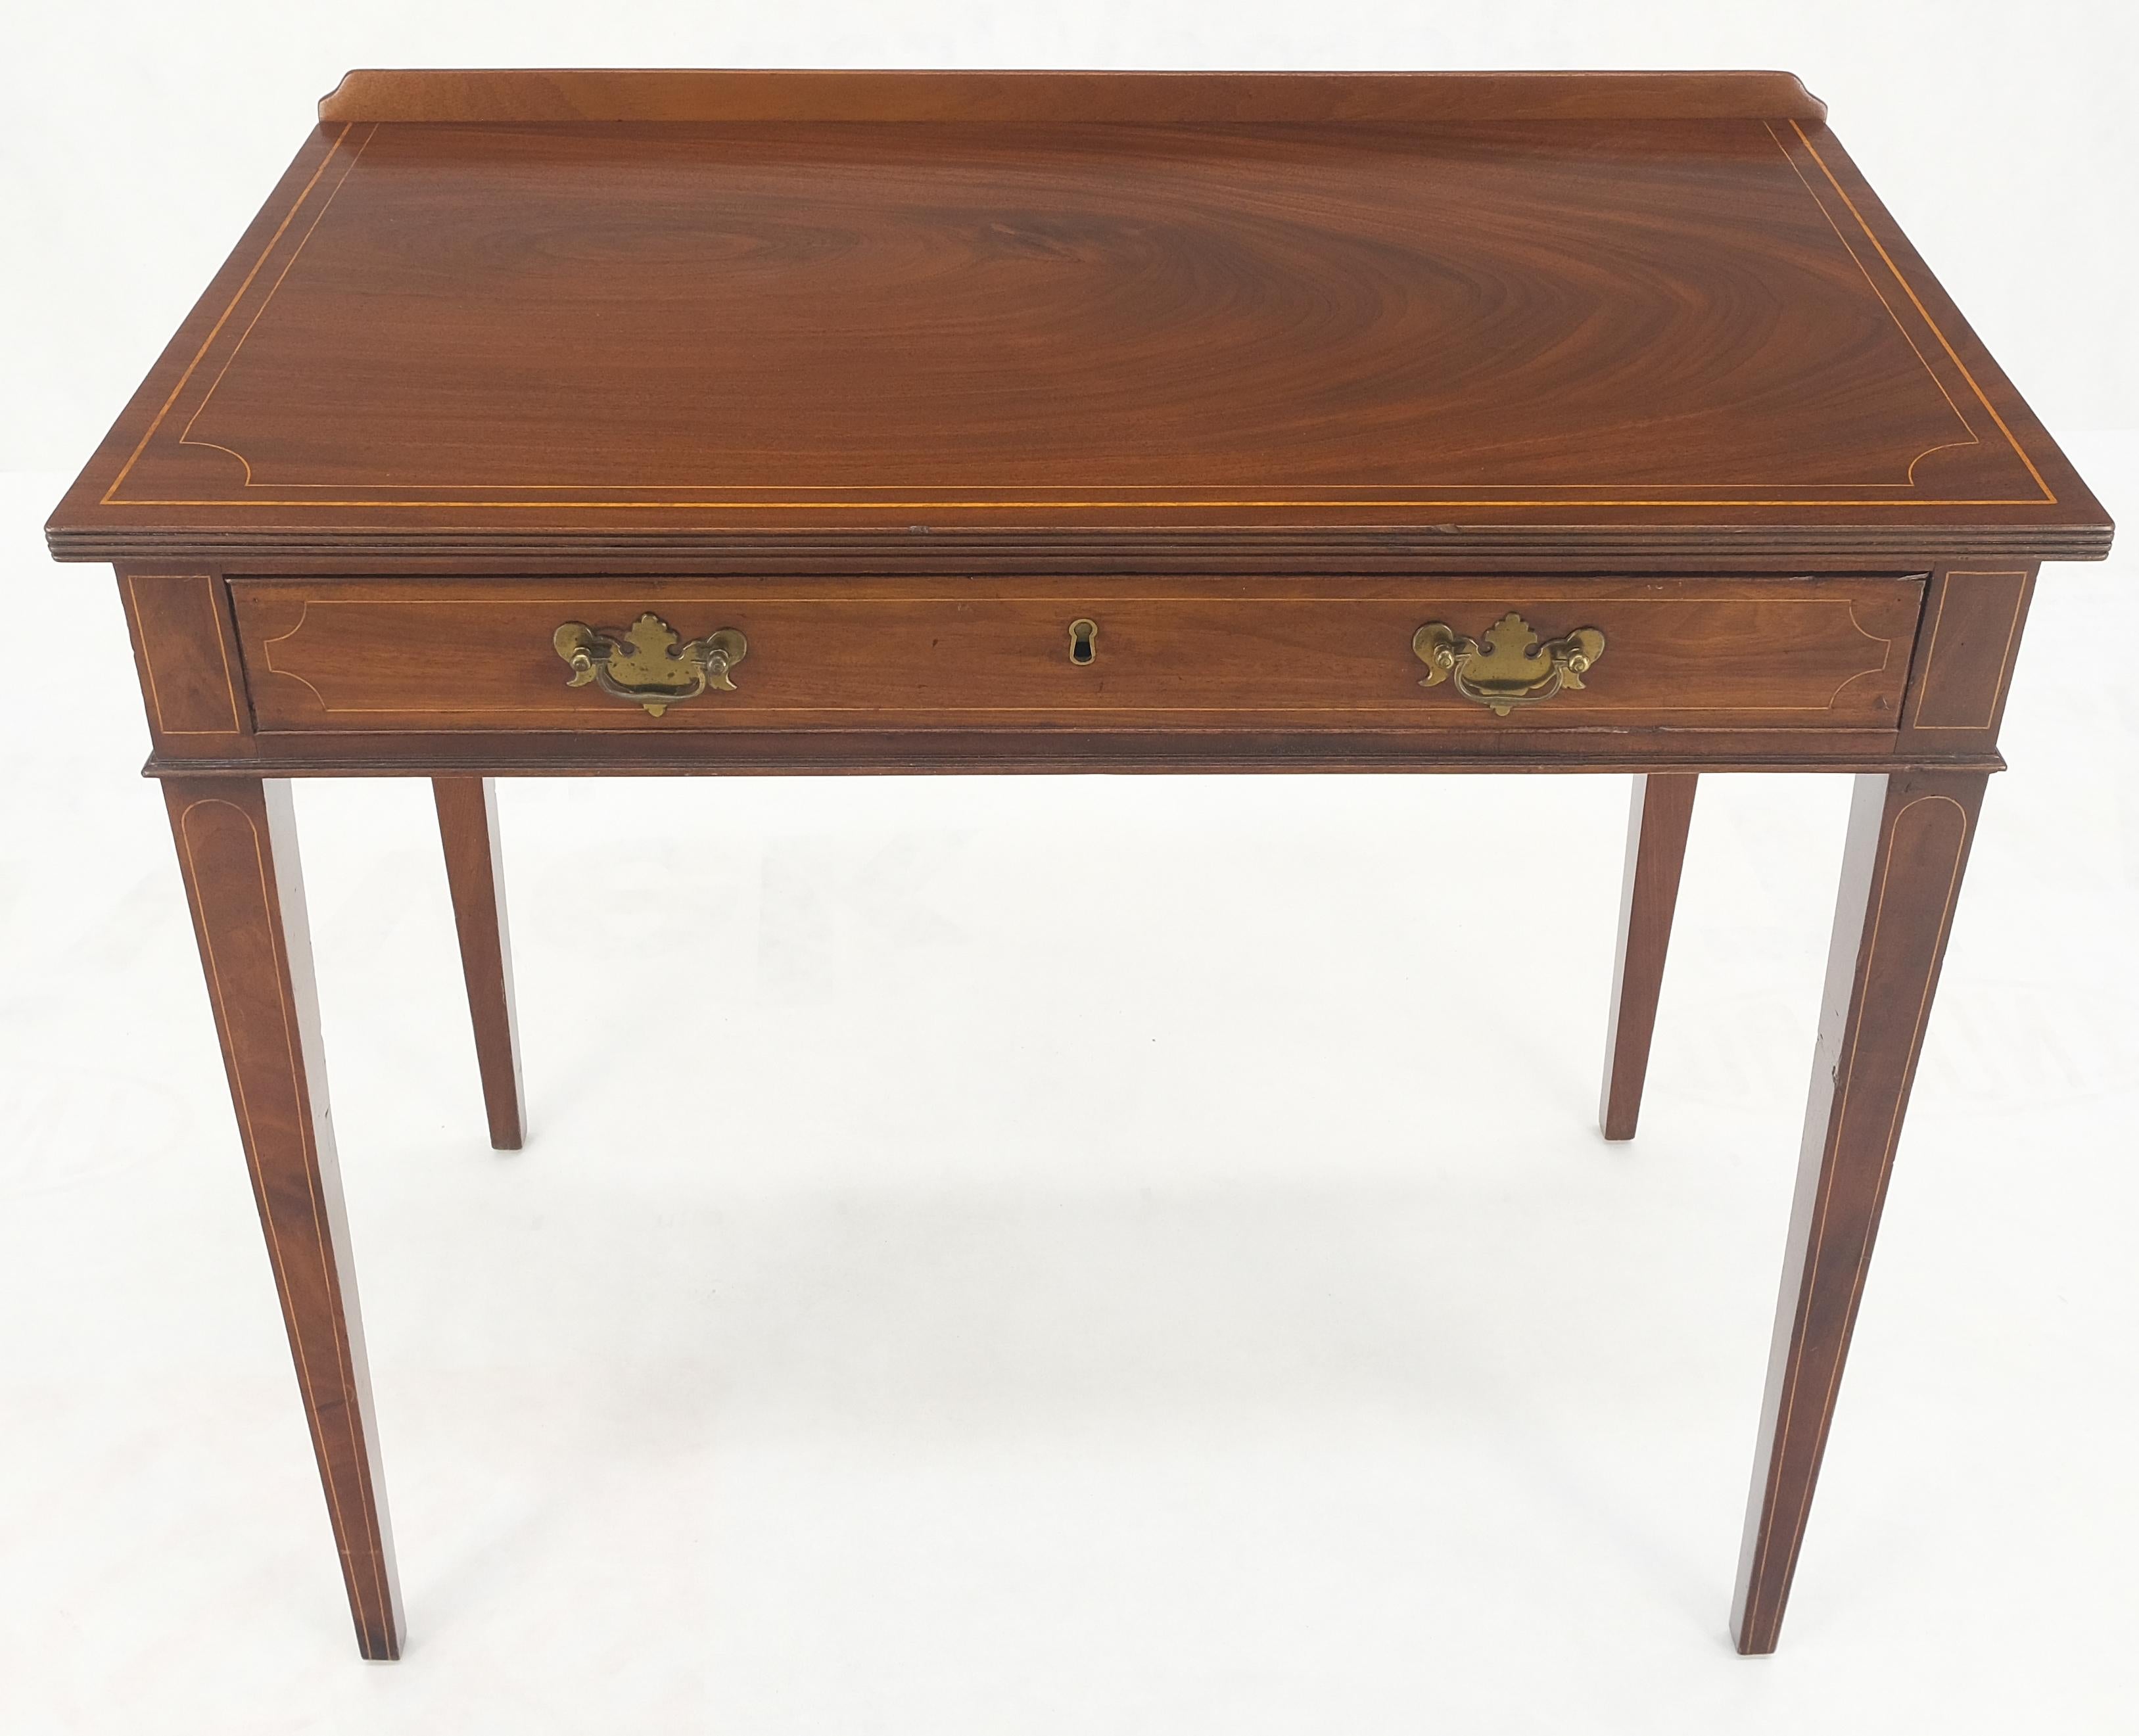 c.1880s Fine One Drawer Inlayed Solid Crotch Mahogany Top Console Table Server Petite Desk Sideboard w/ Backsplash  MINT!